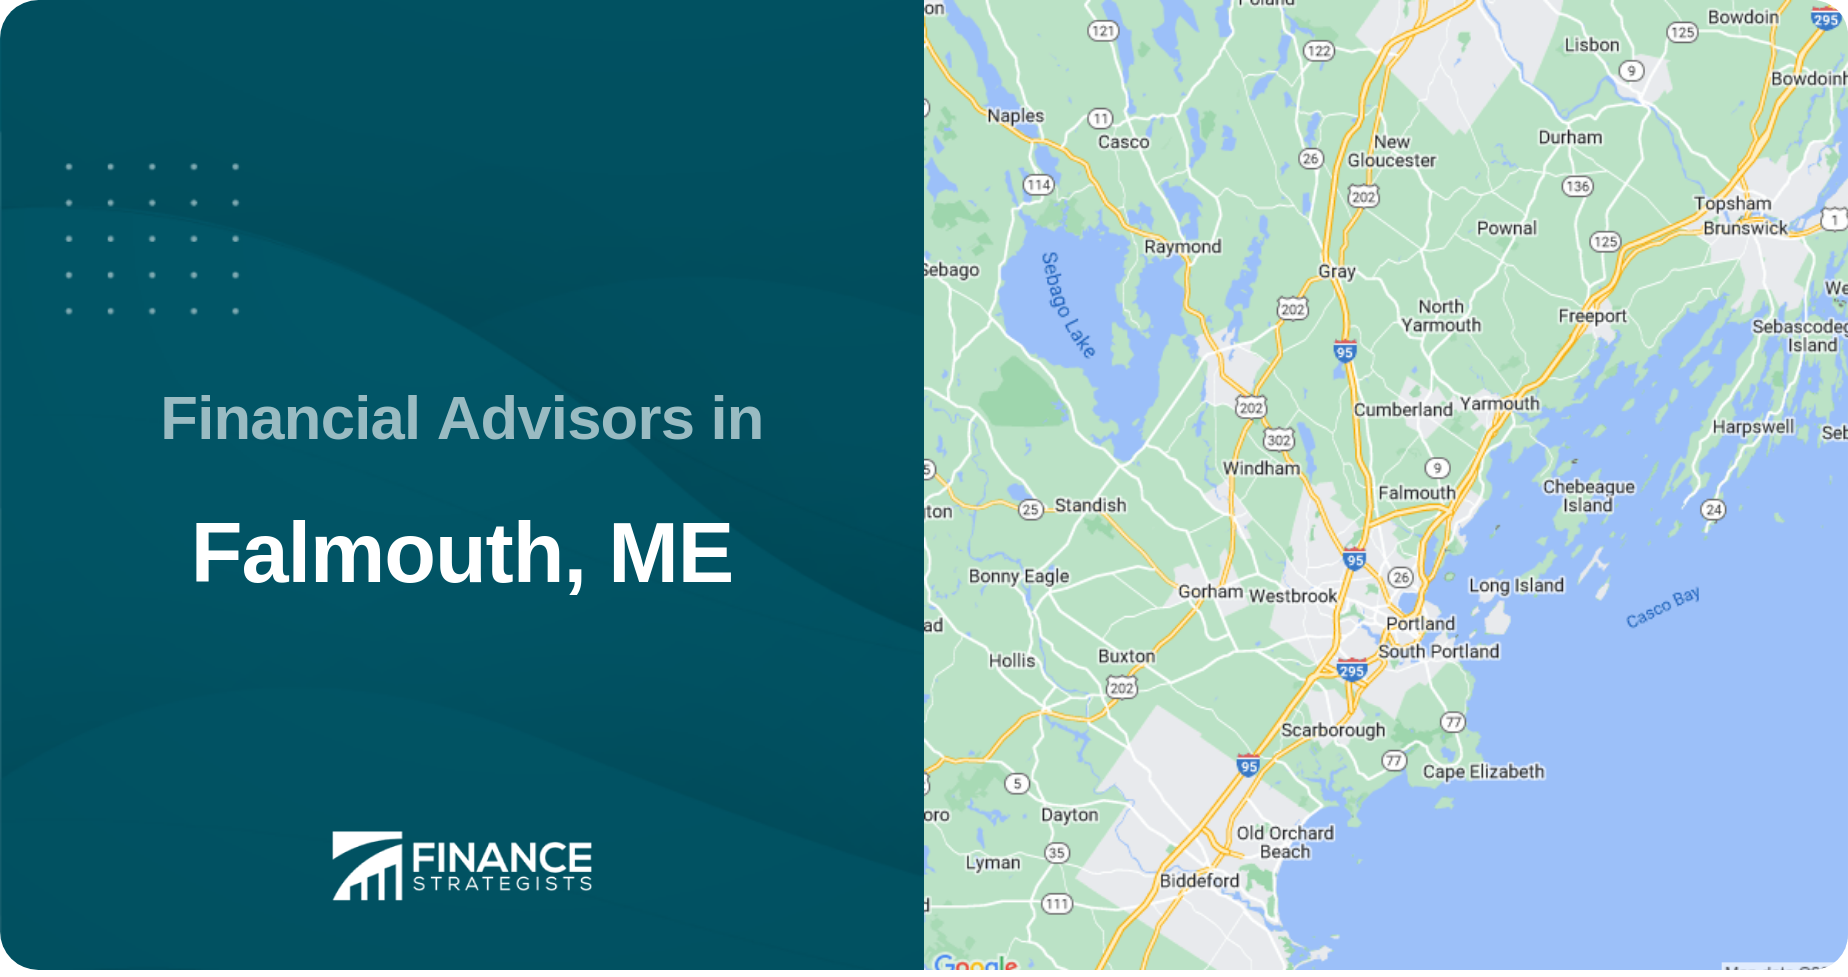 Financial Advisors in Falmouth, ME